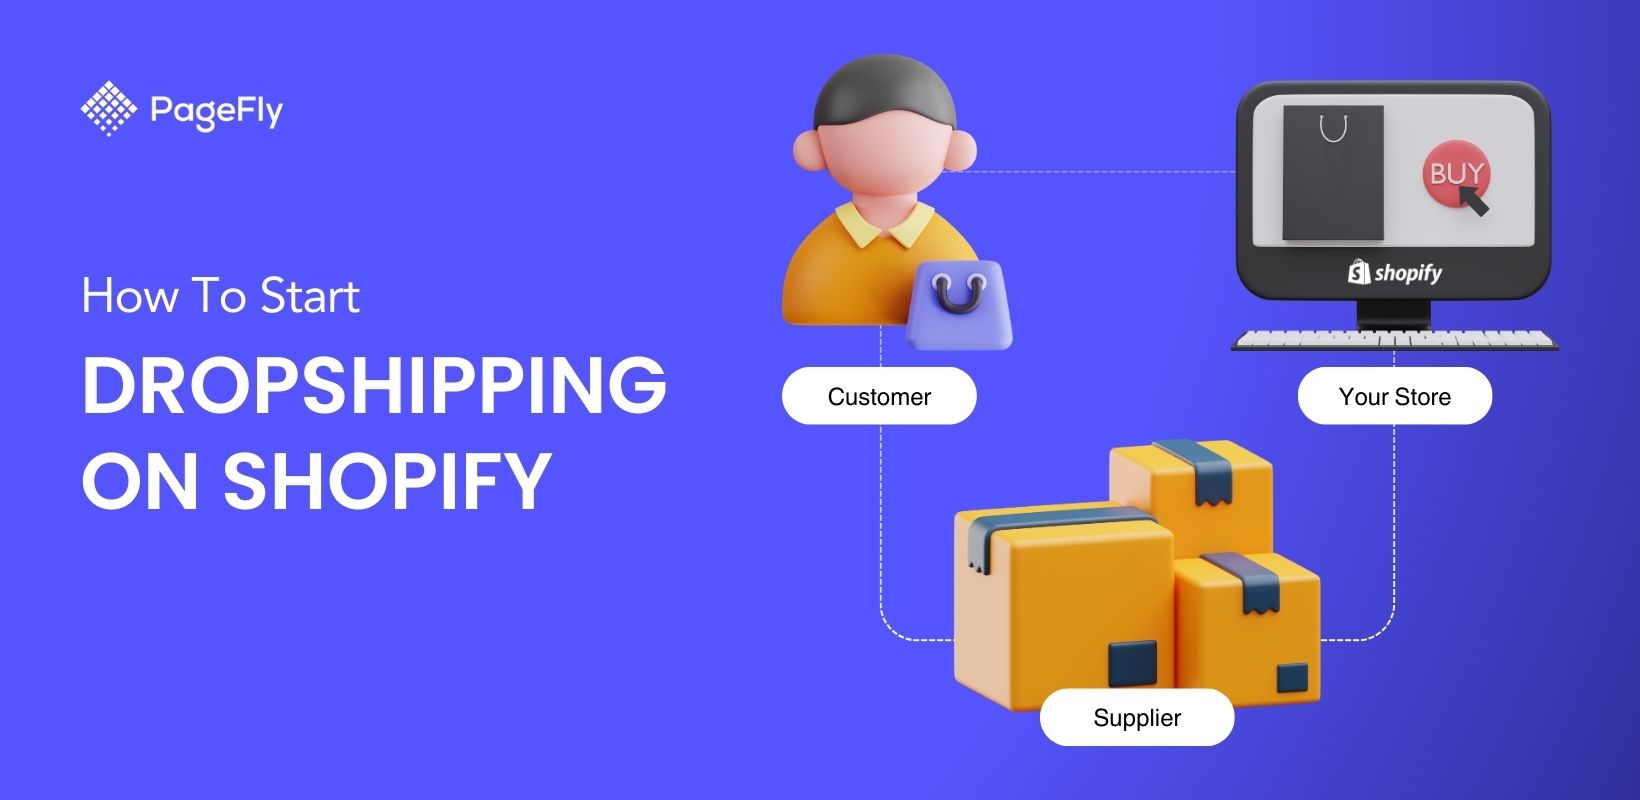 How to Start Dropshipping on Shopify Like a Pro